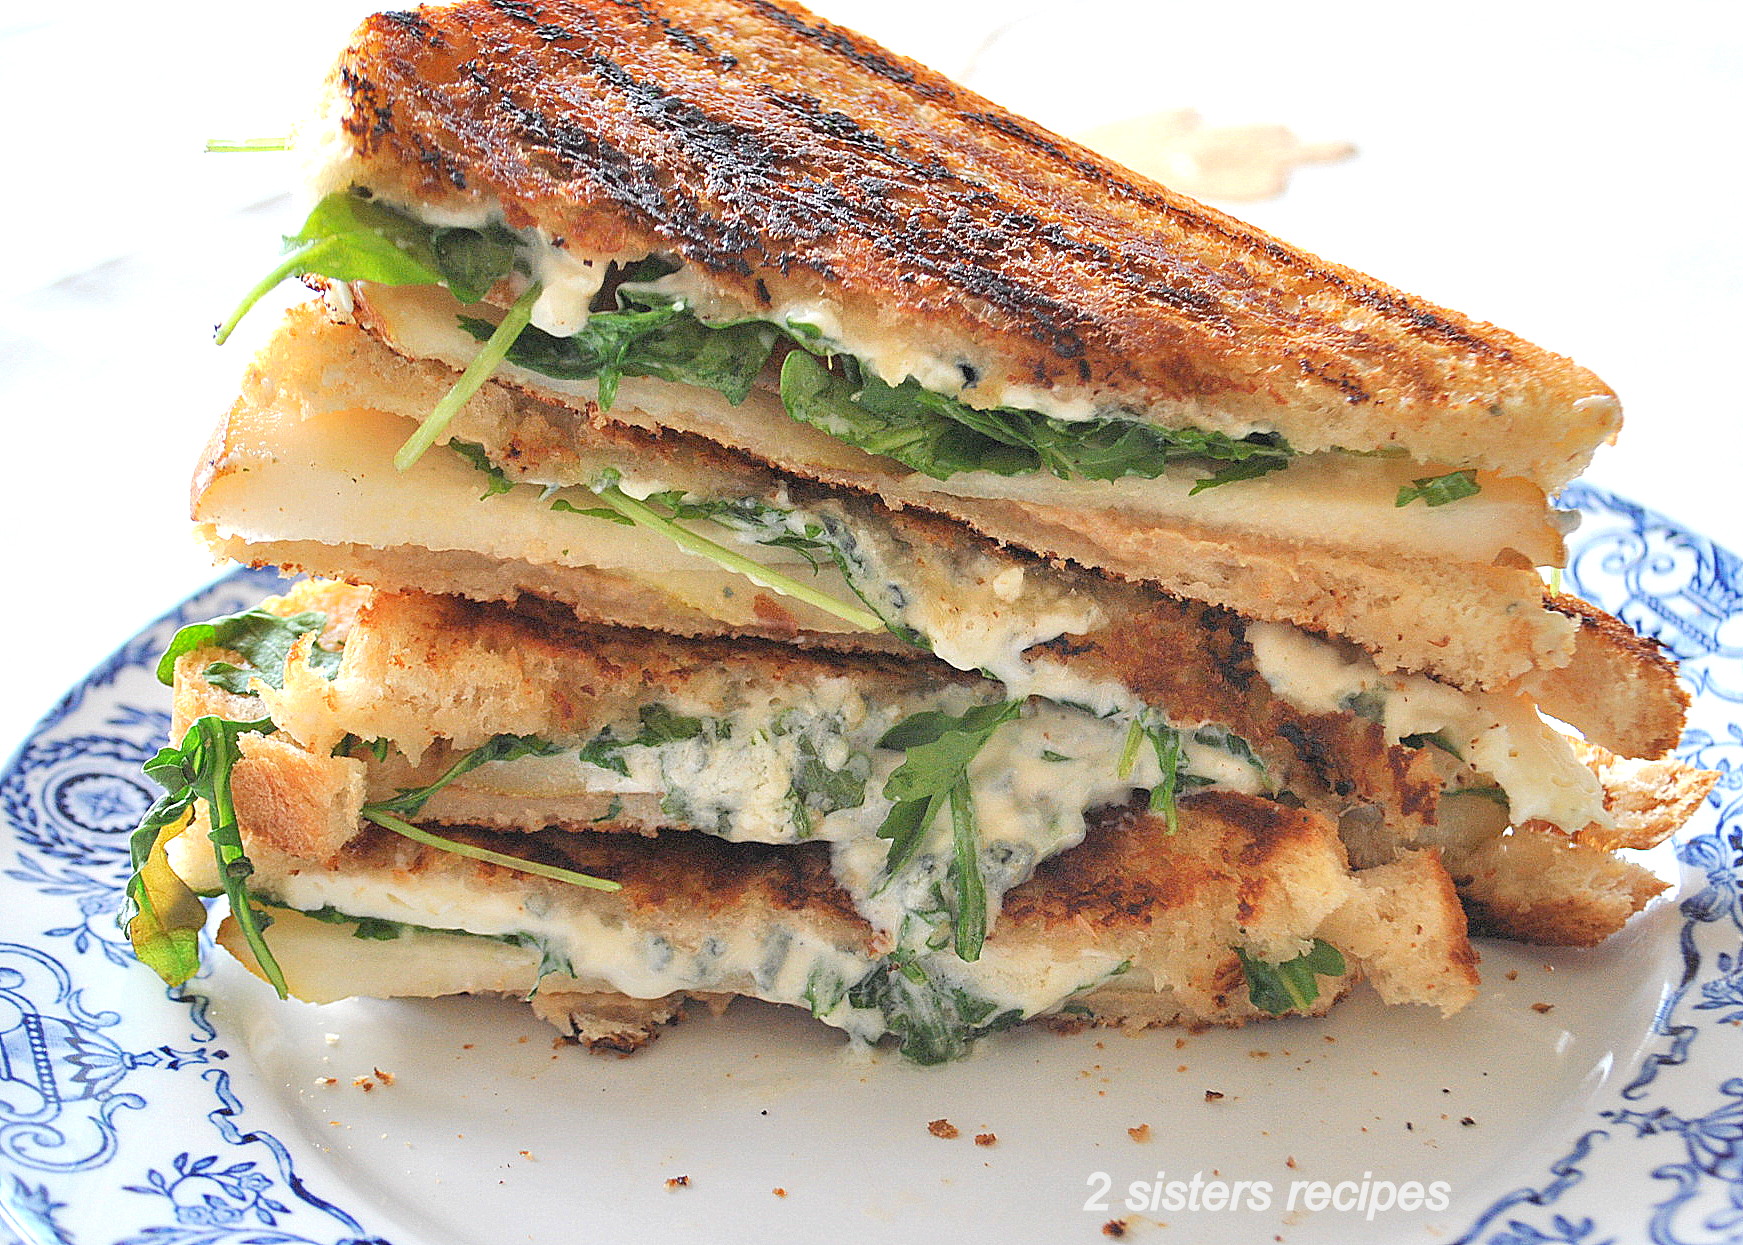 Grilled Cheese and Pear Sandwich by 2sistersrecipes.com